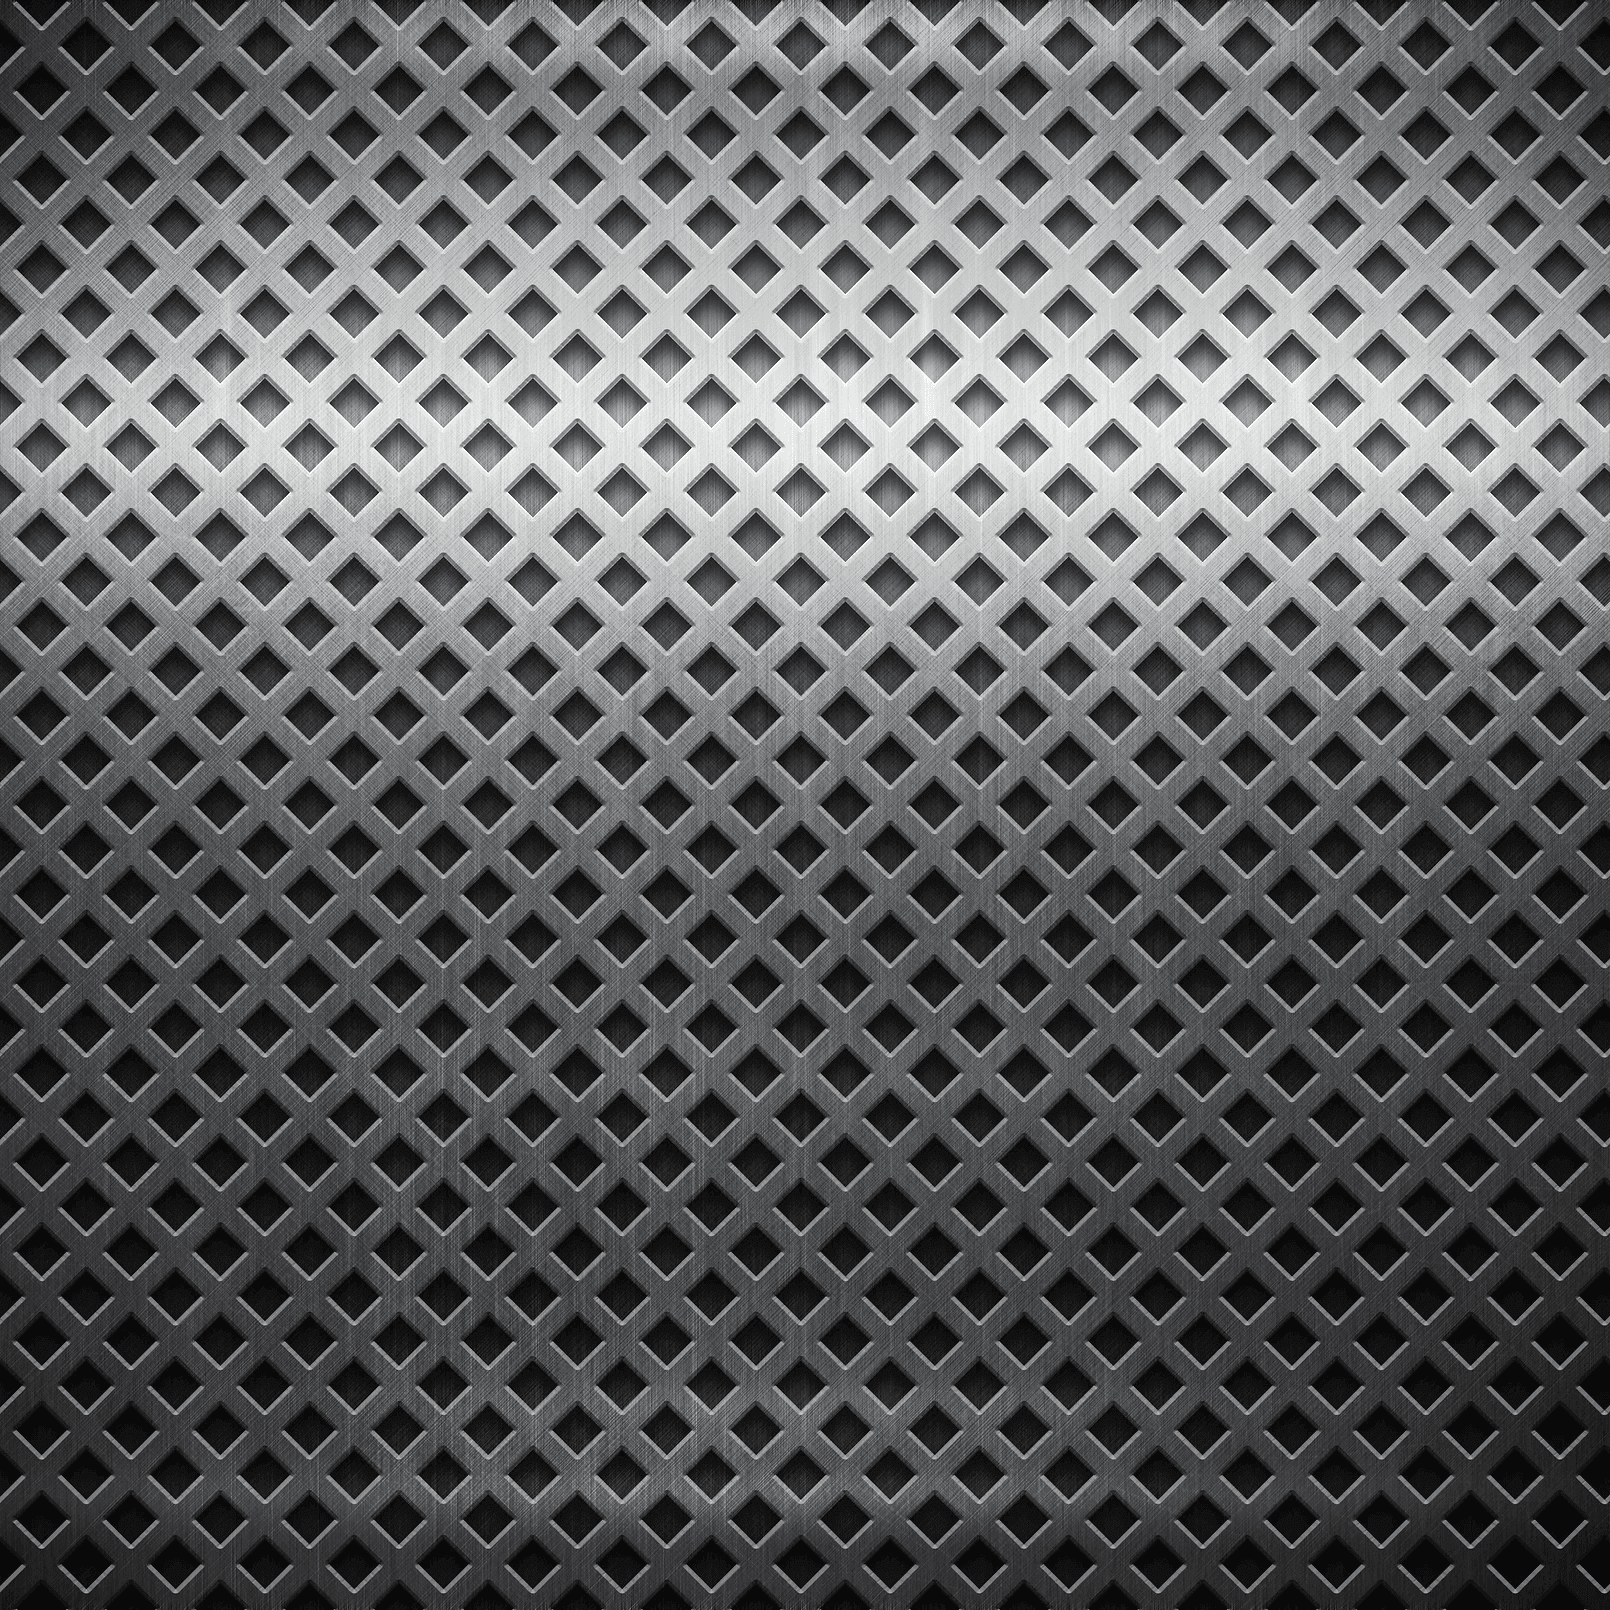 Square Hole Perforation Pattern